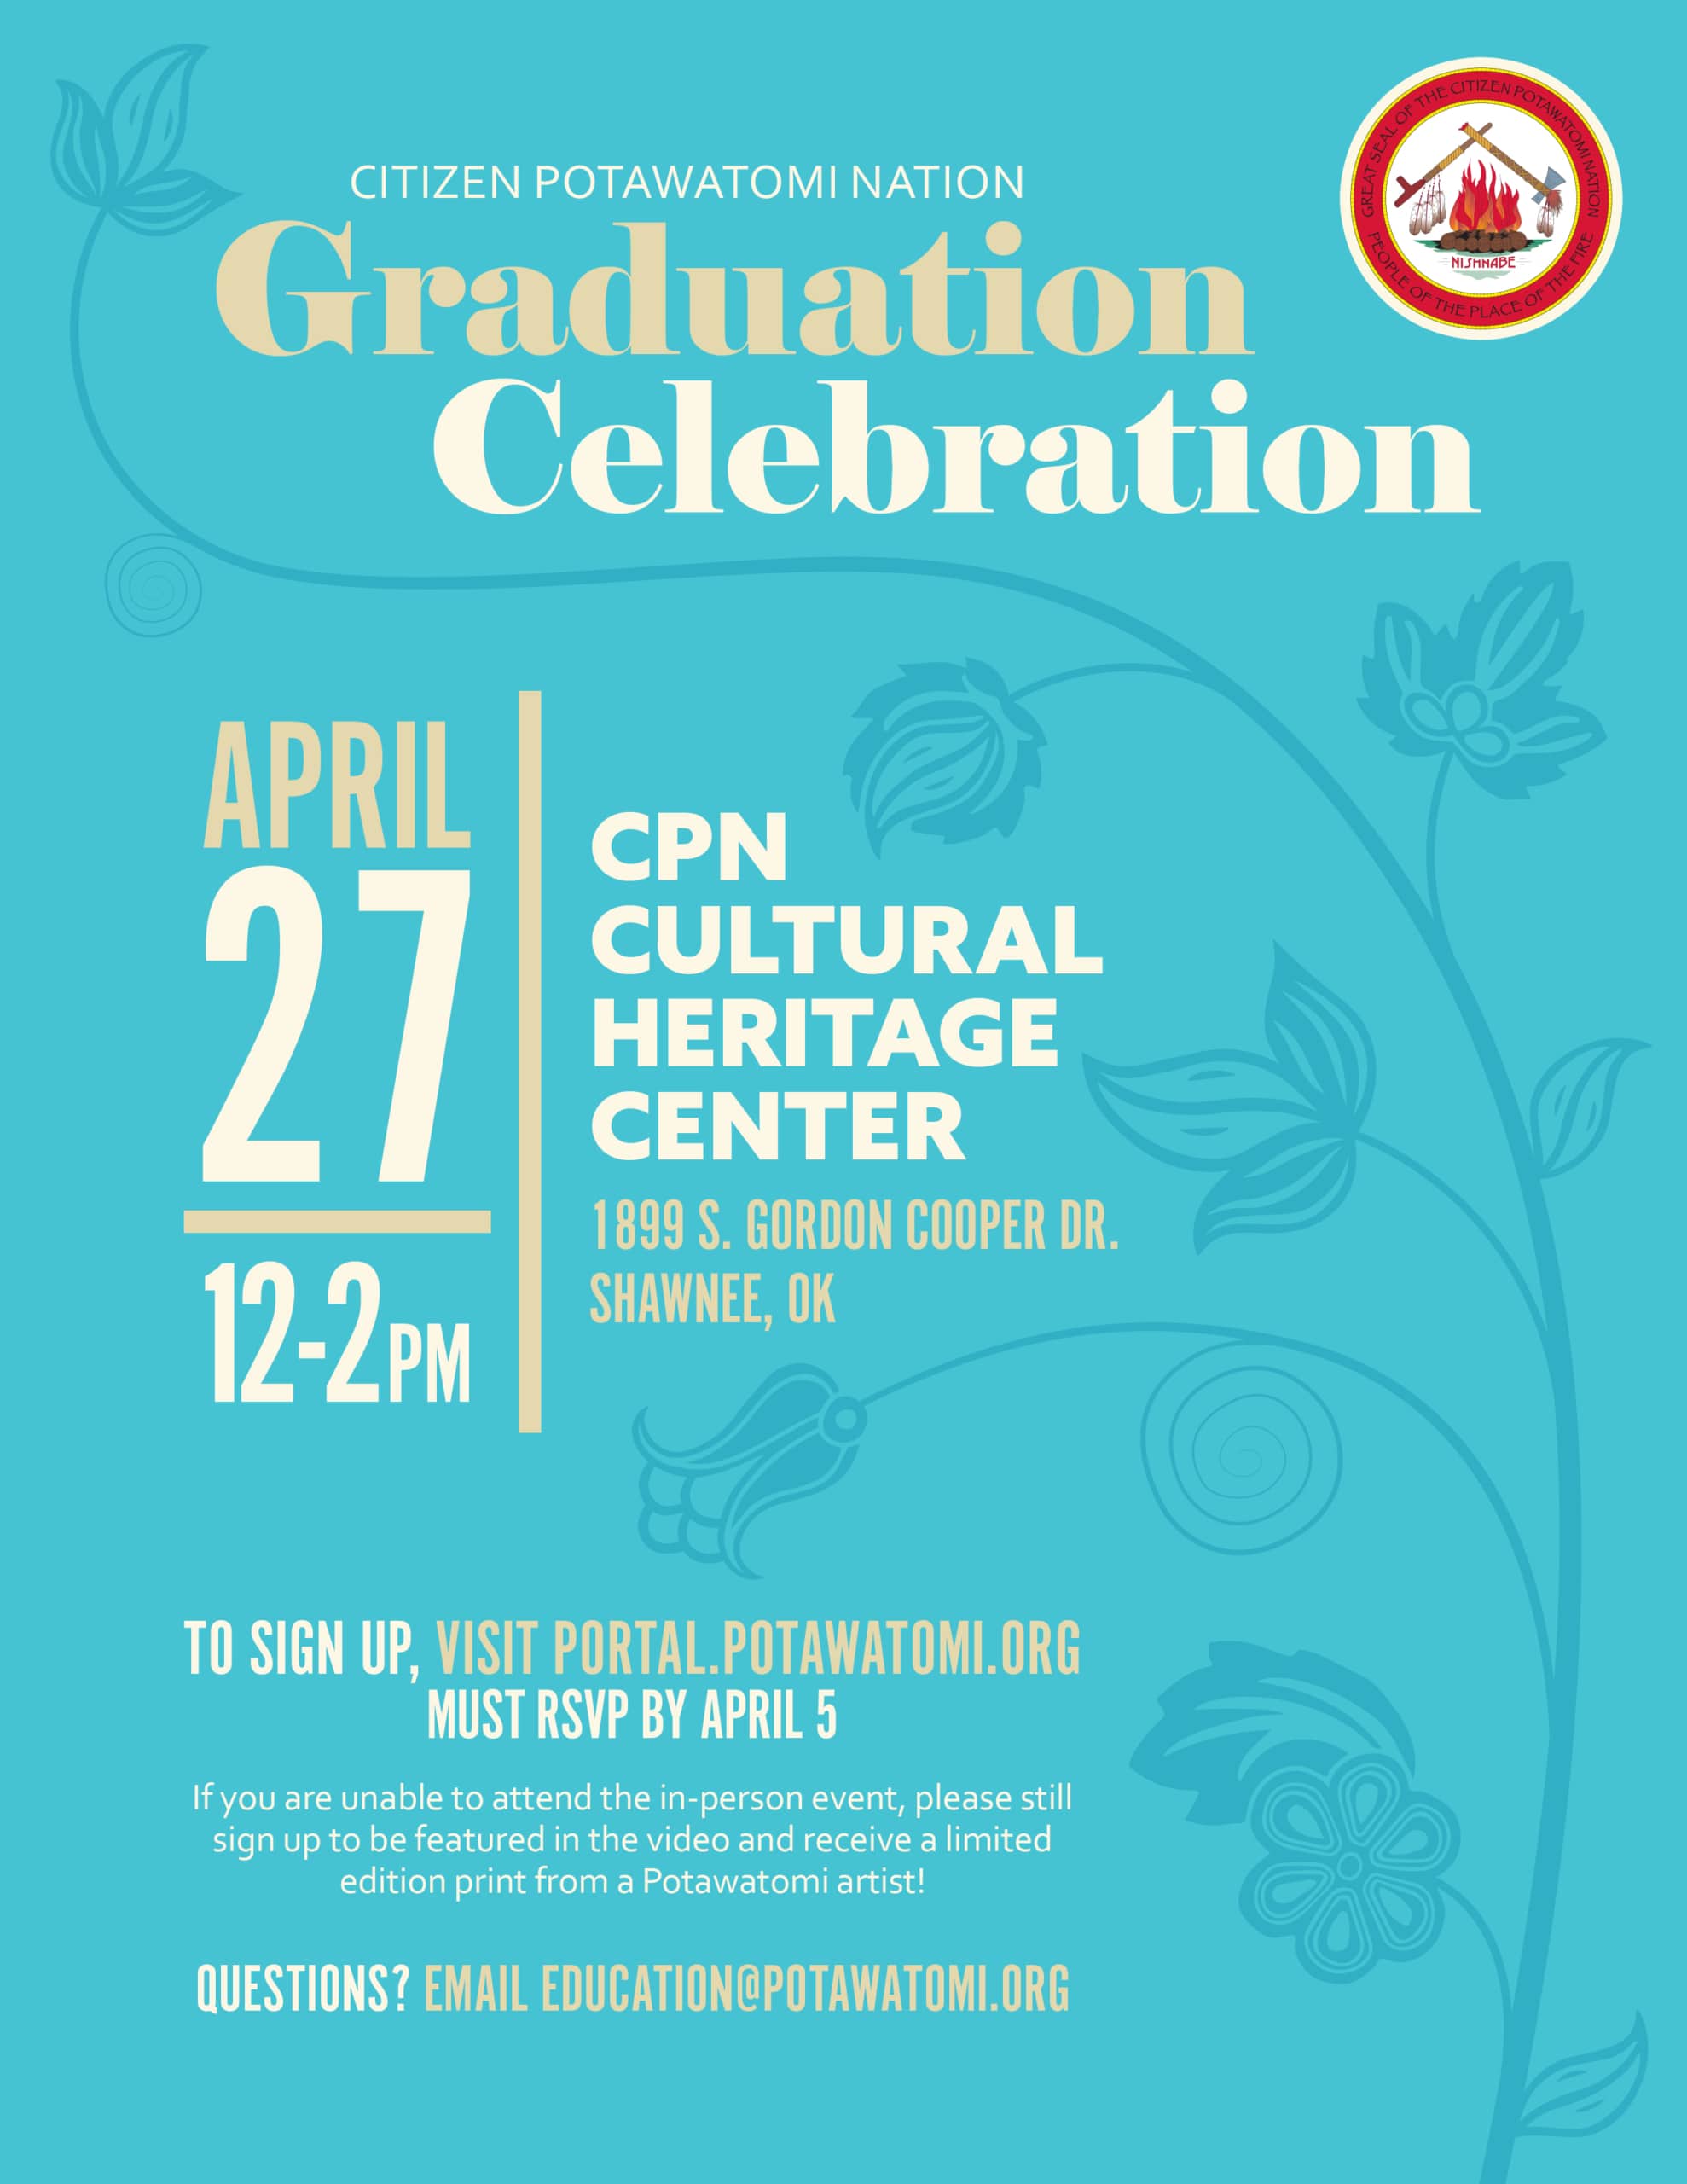 Teal background with gold and cream text and the CPN seal inviting CPN students to a graduation celebration on April 27, 2024, at the CPN Cultural Heritage Center from 12-2 p.m.